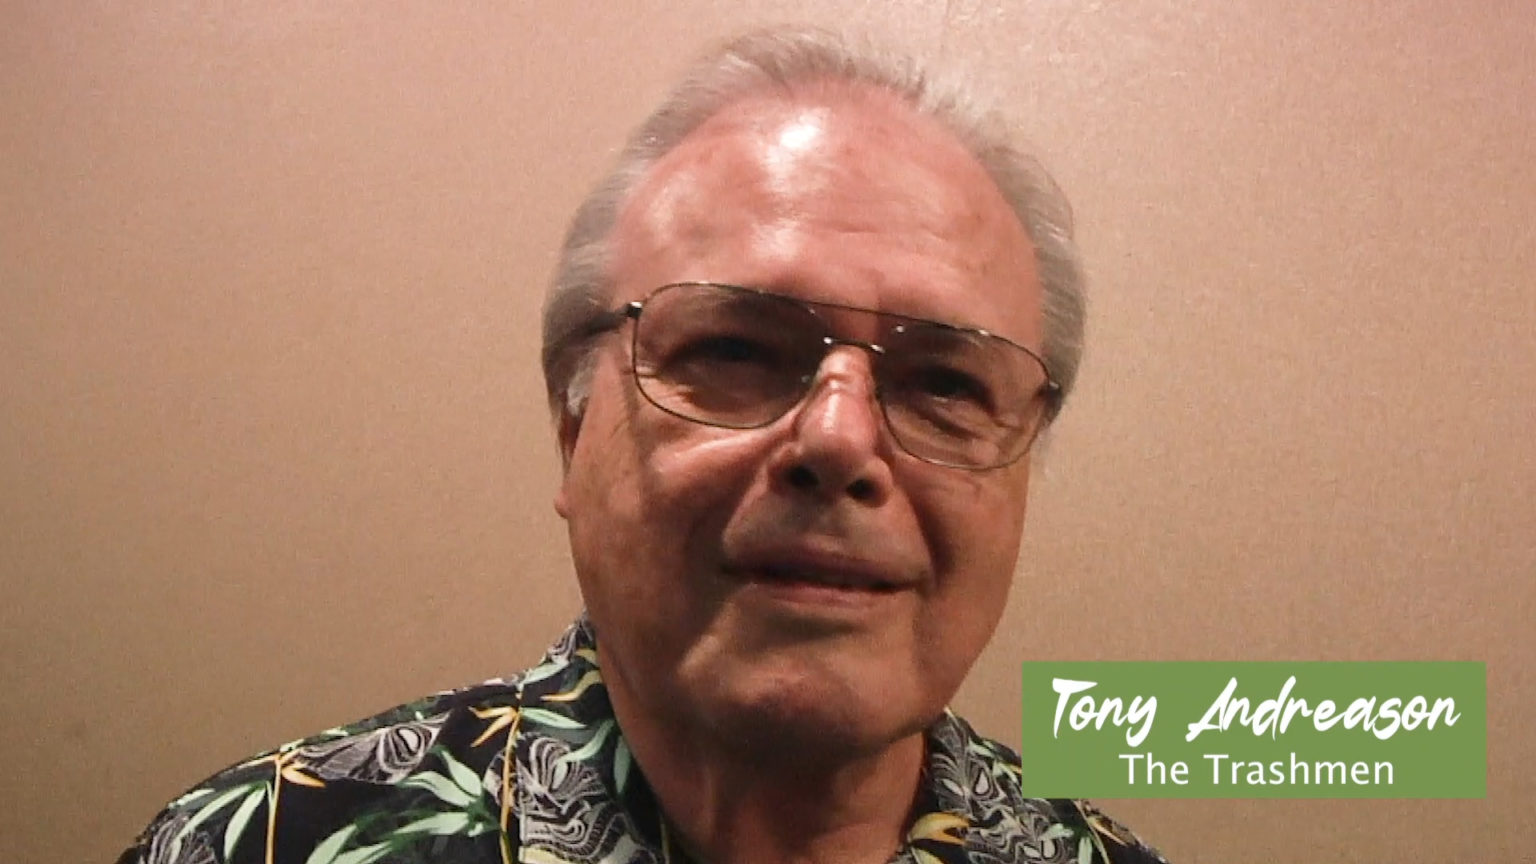 Watch The Trashmens Tony Andreasons Interview and performance at the